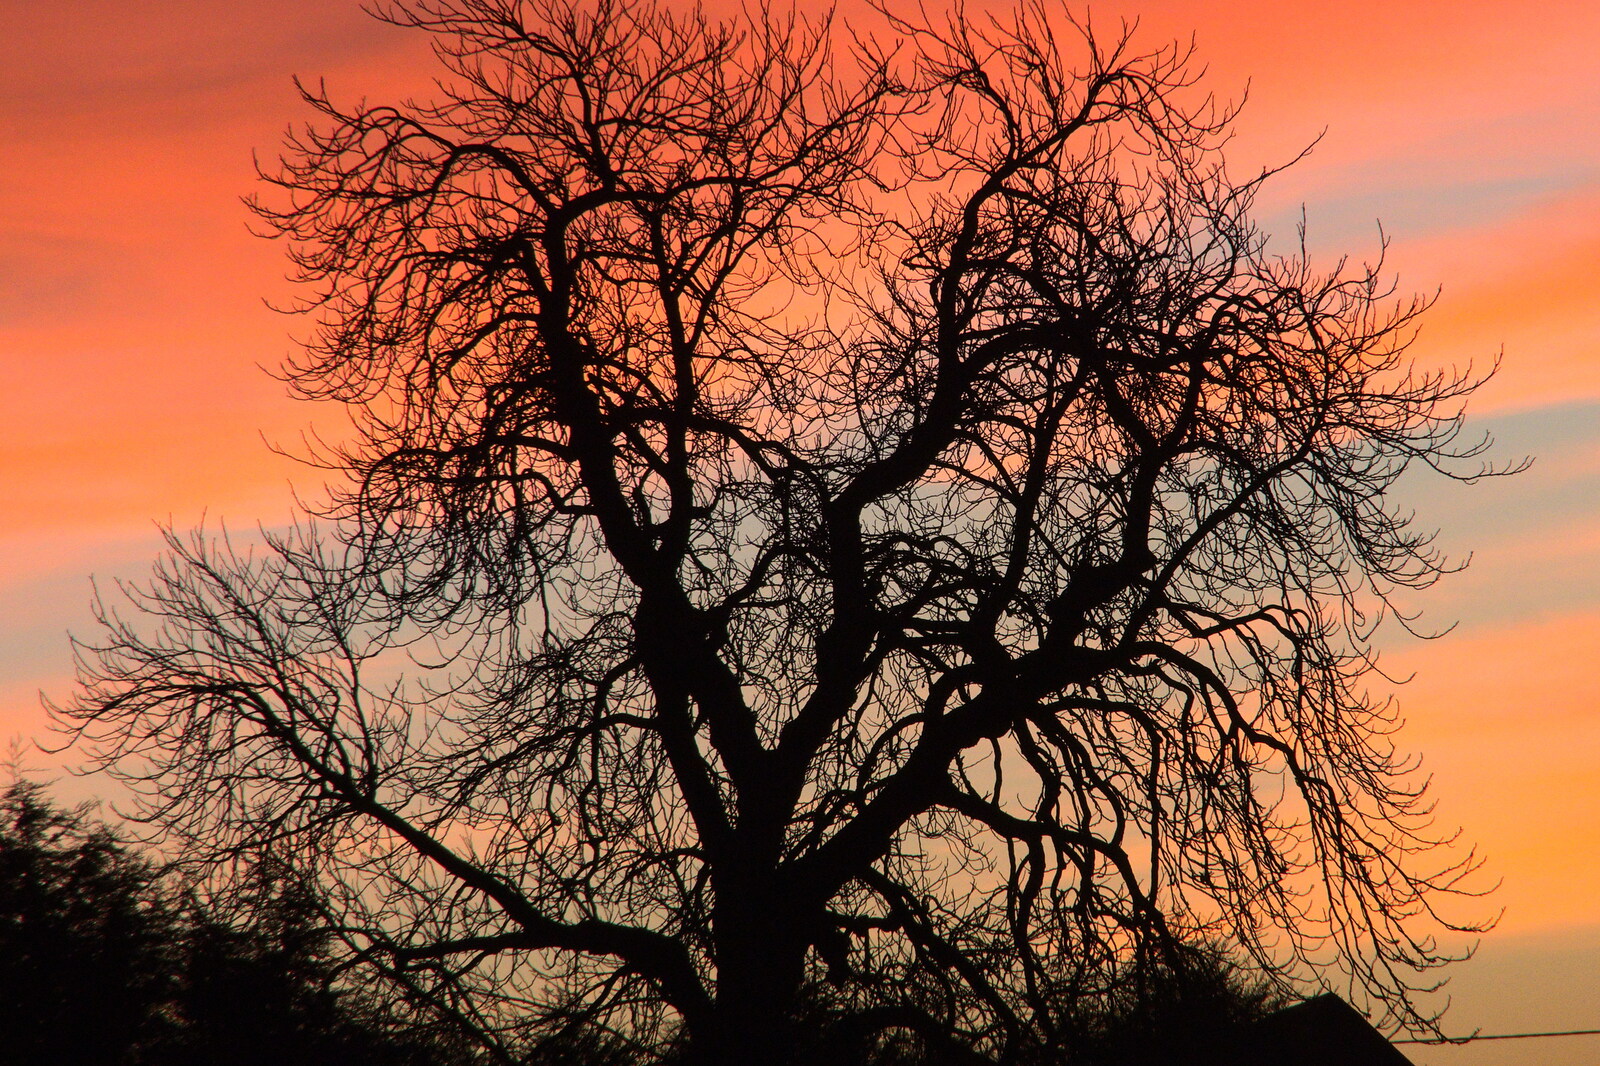 Burning sky through the bones of a tree from A Visit to Blickling Hall, Aylsham, Norfolk - 9th January 2022